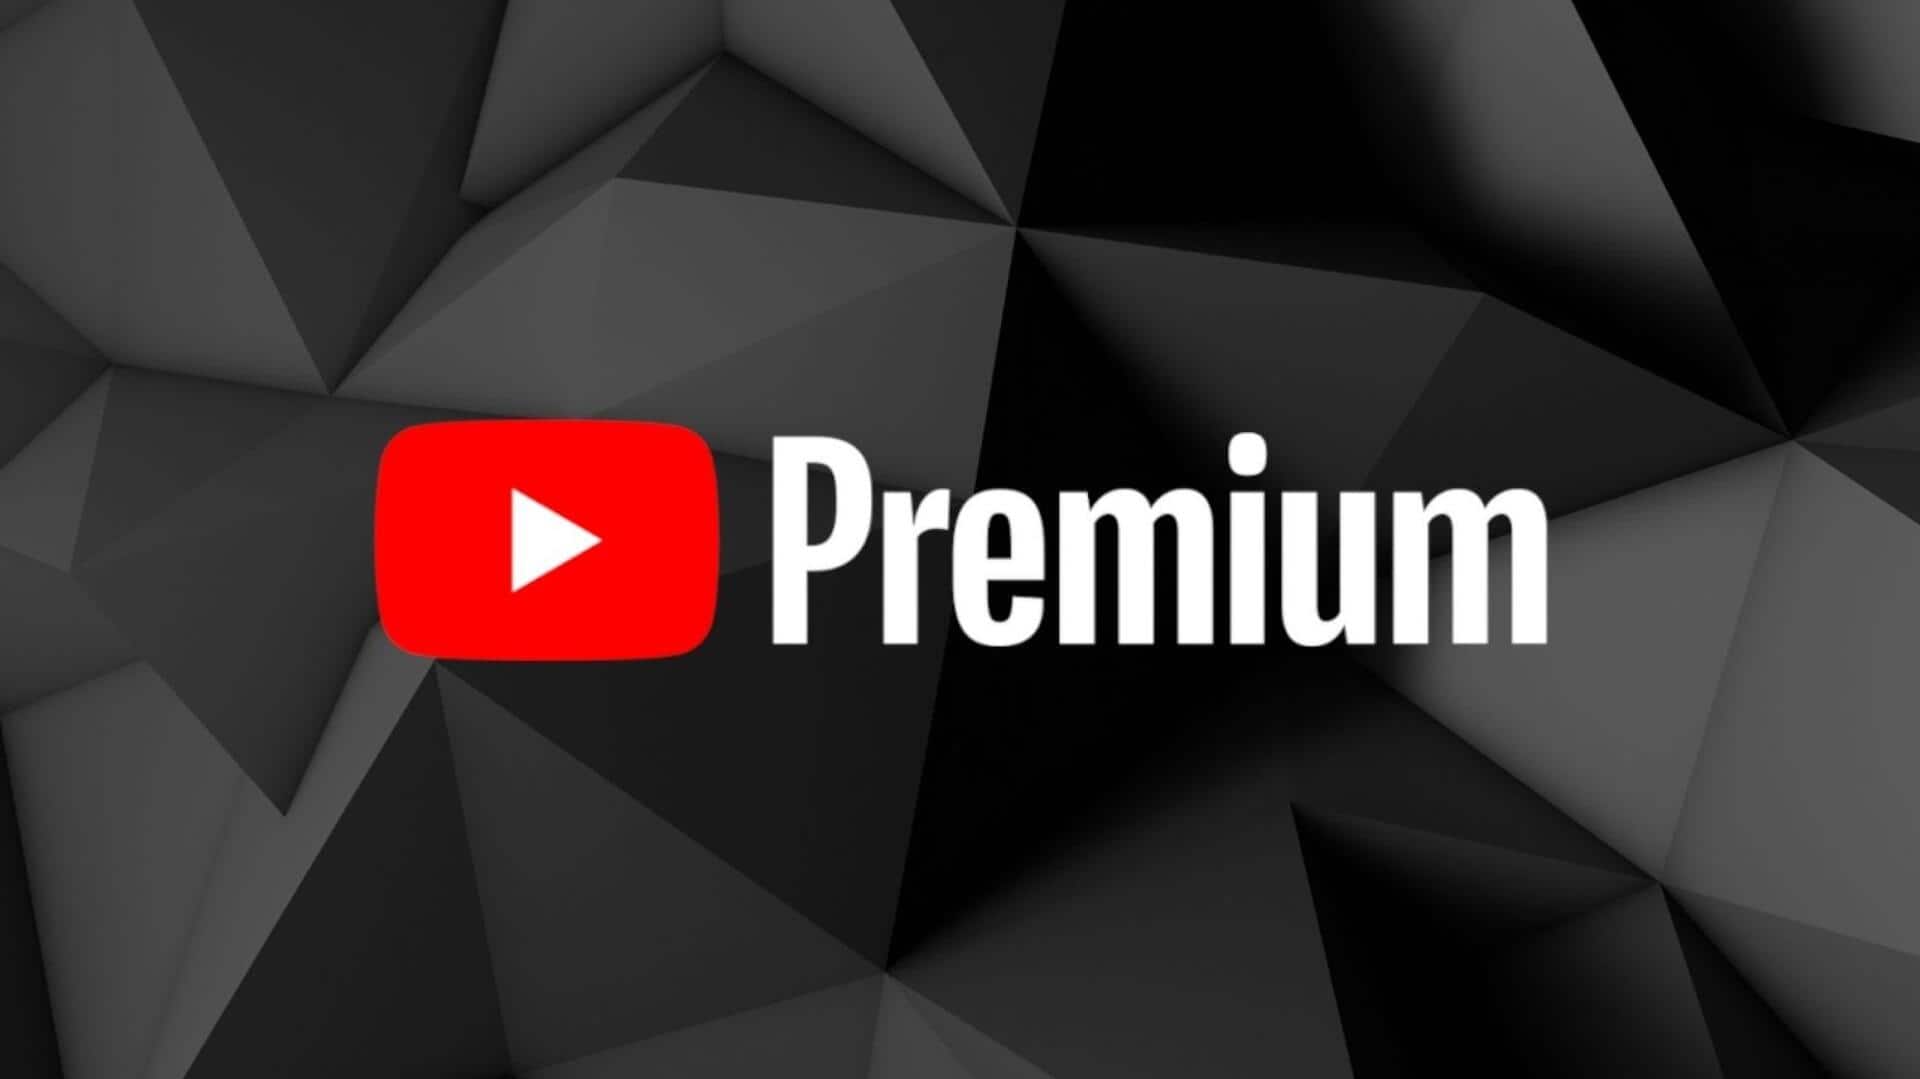 YouTube Premium launches 'Playables' for in-app gaming: How to use